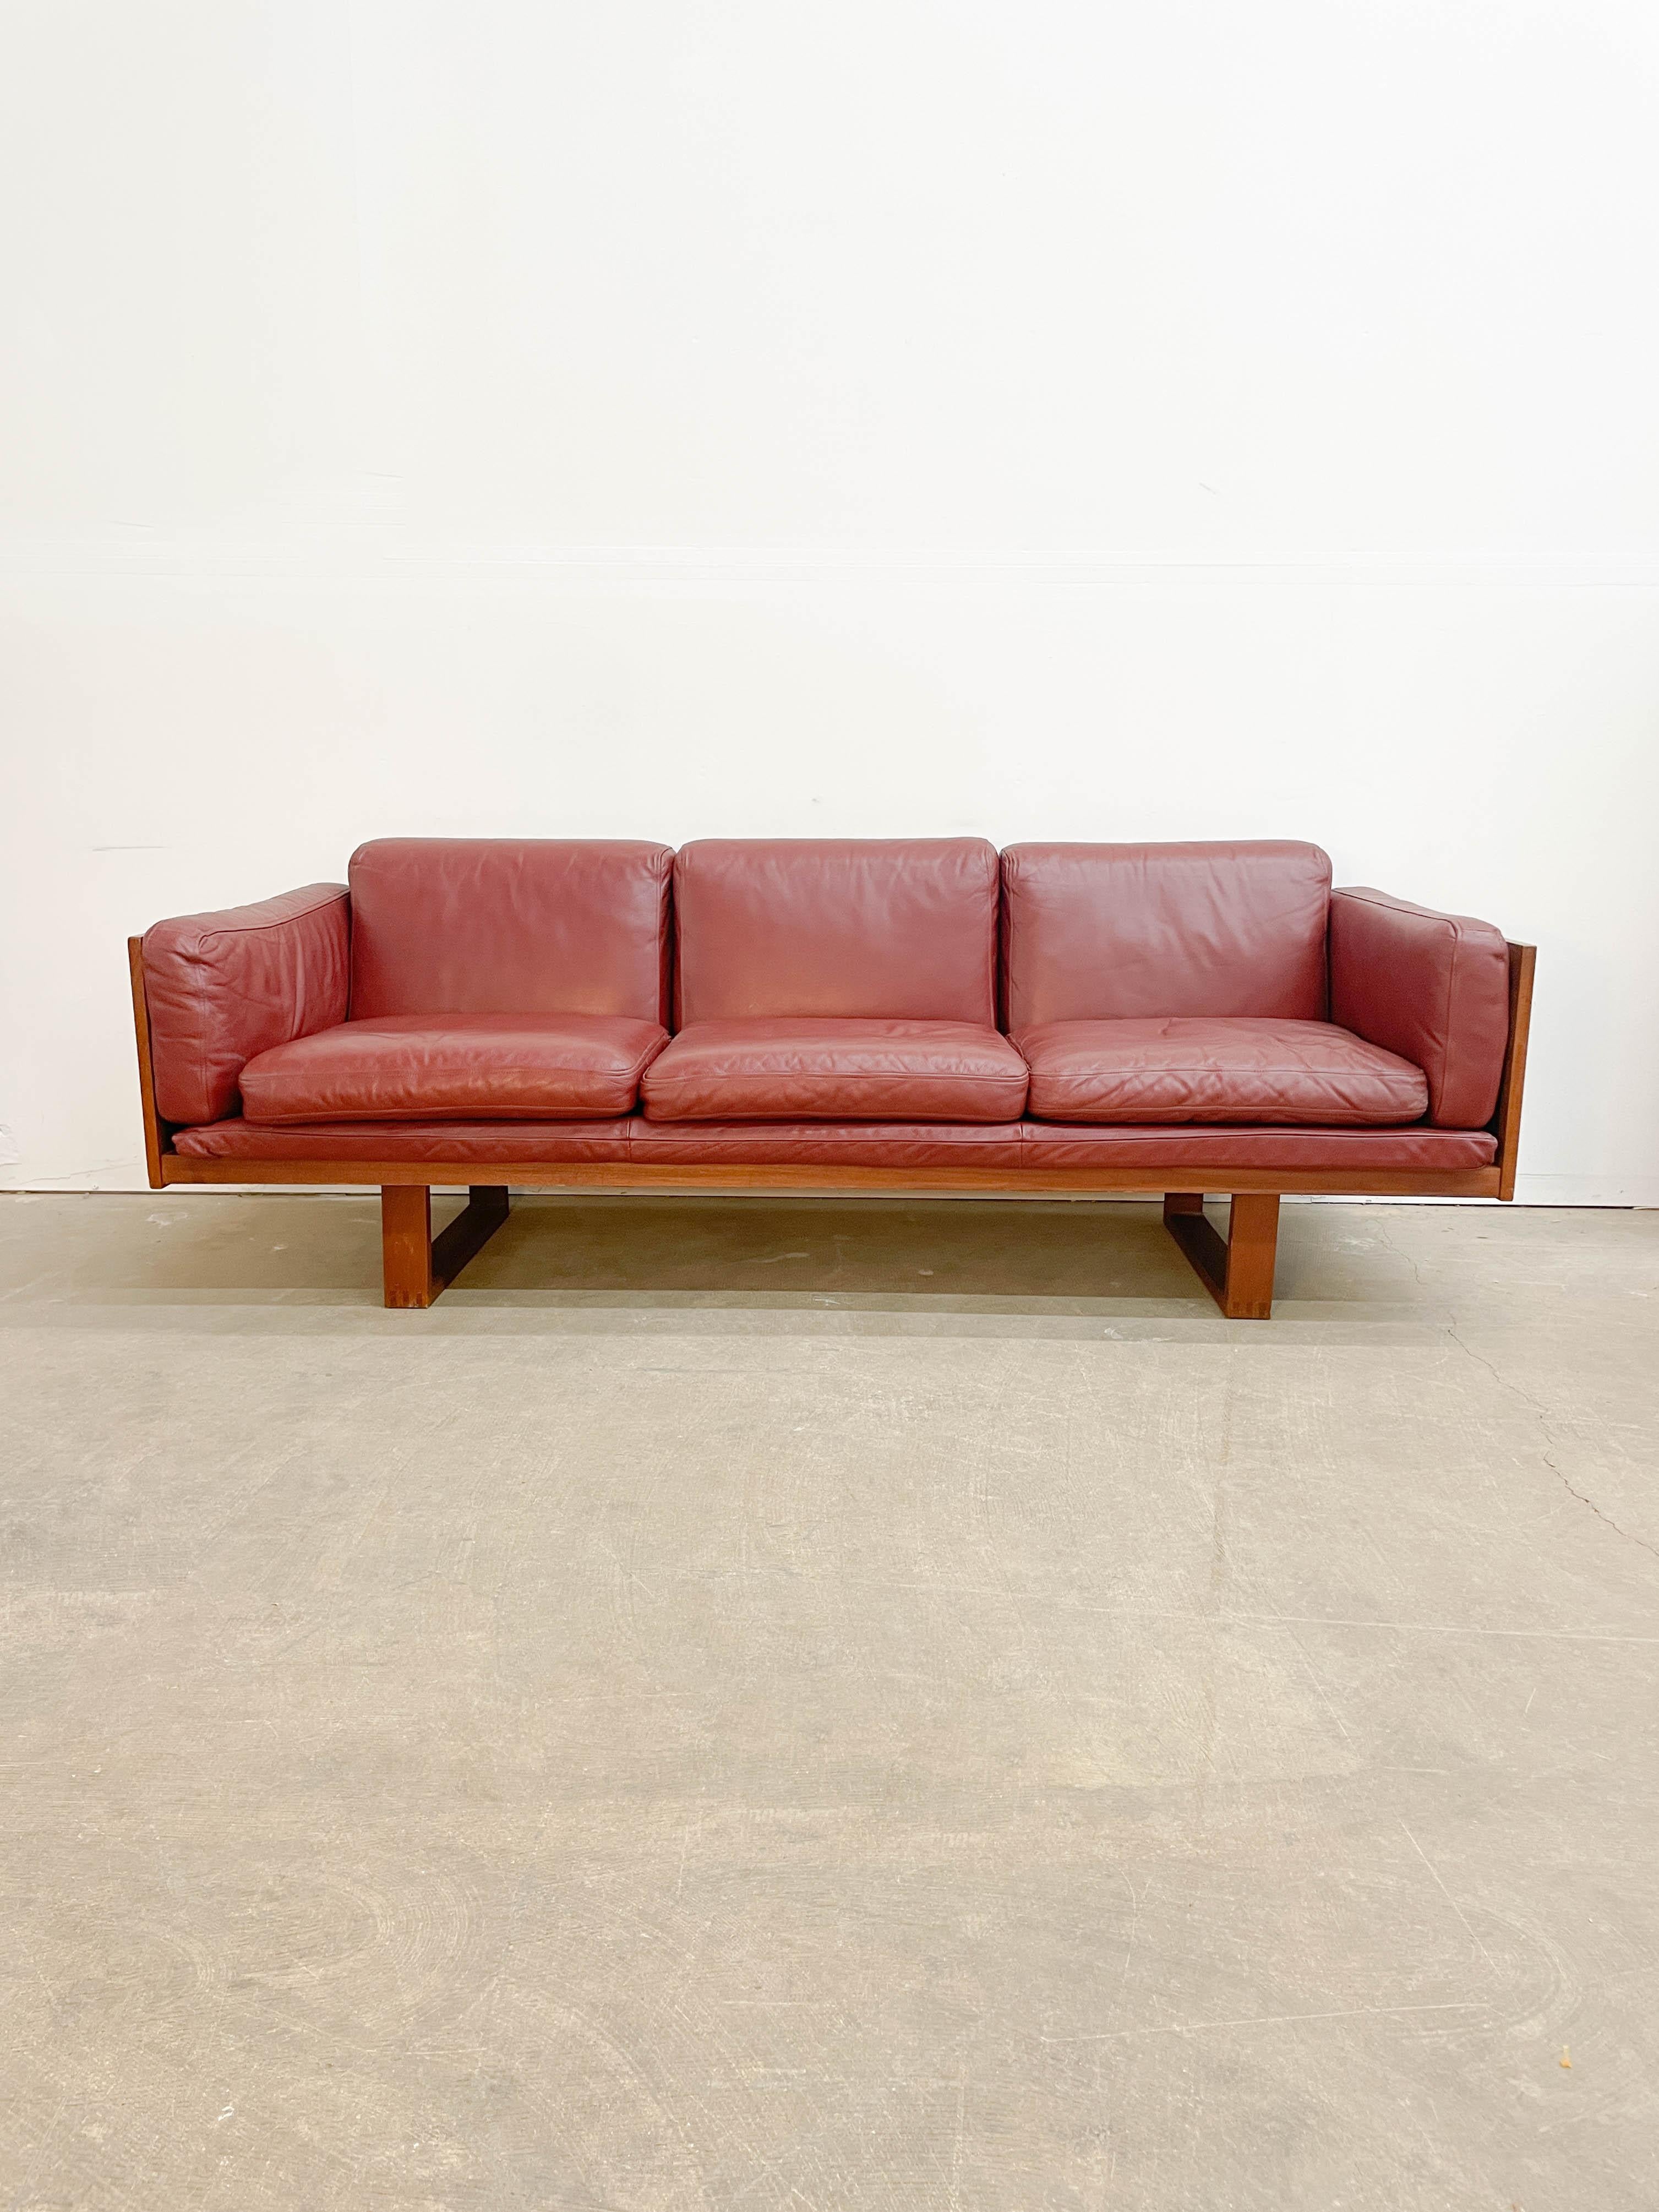 A Danish modern classic, this teak frame sofa with basket weave panels and leather cushions was designed in the 1960s by Poul Cadovius for France and Son. This sofa offers superb contrast between its angular sled legs, unique woven wood texture